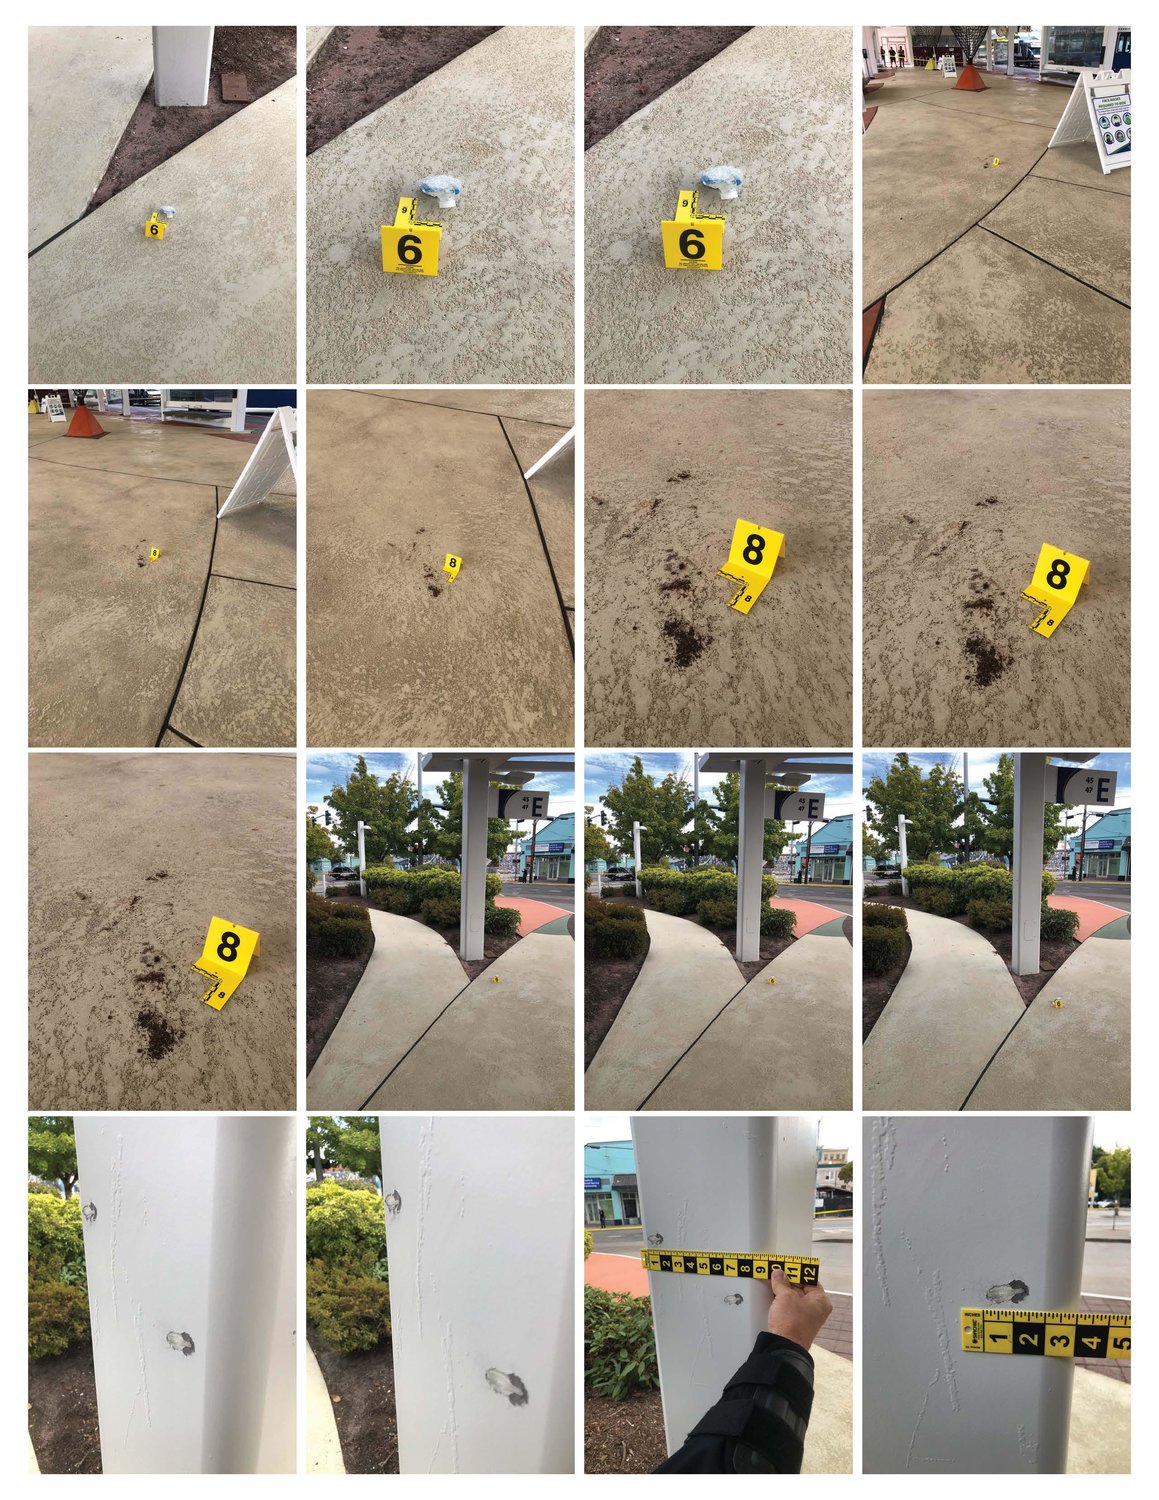 This is one of more than 24 pages of photos taken by police on Sept. 4, 2021; this shows police marking the location of spent cartridges and nicks from bullets.